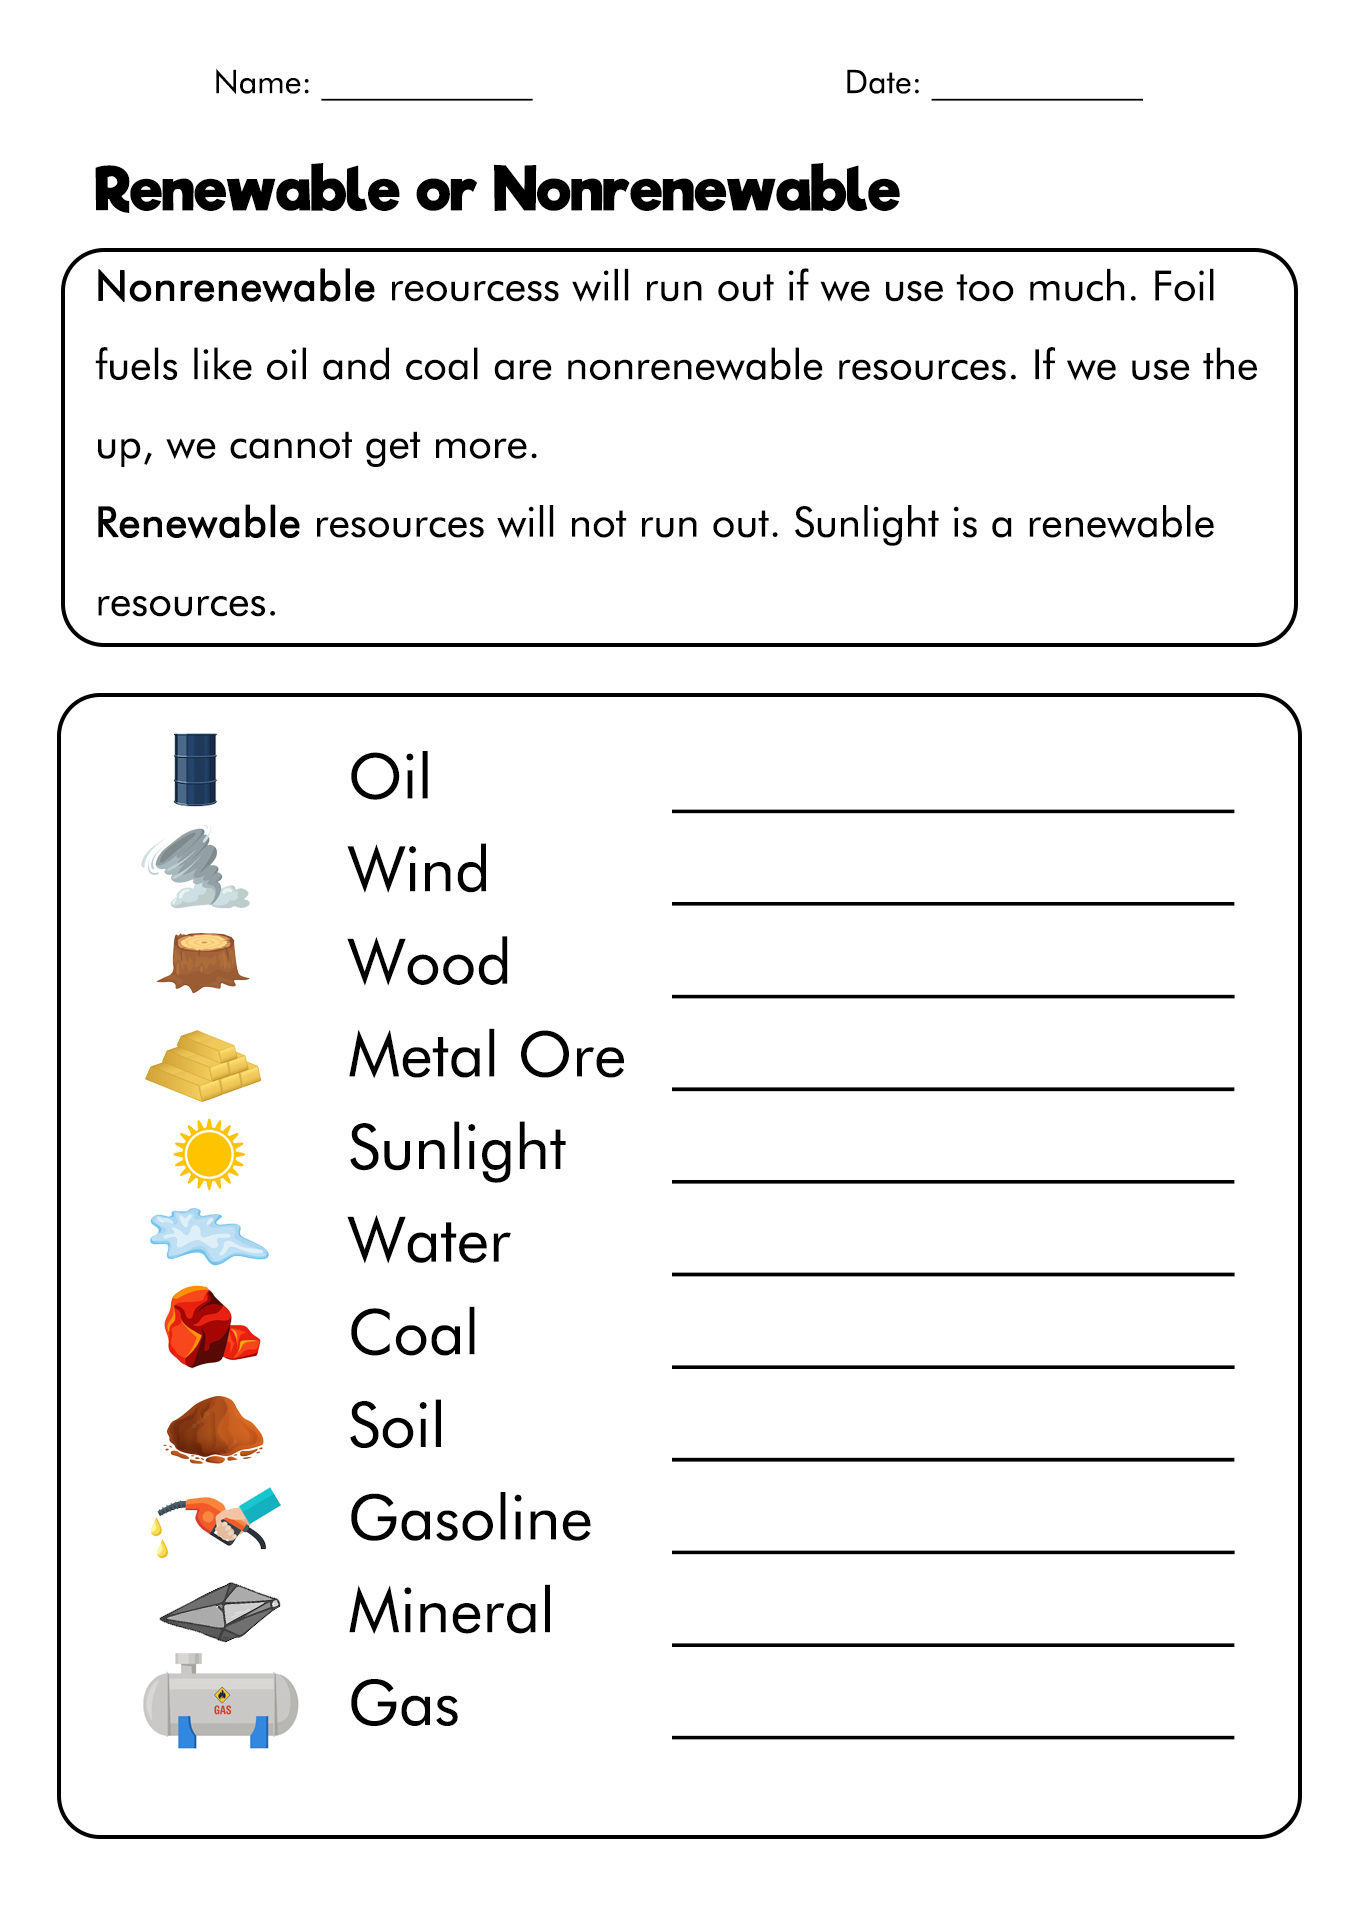 Fossil Fuels Non Renewable Energy Image